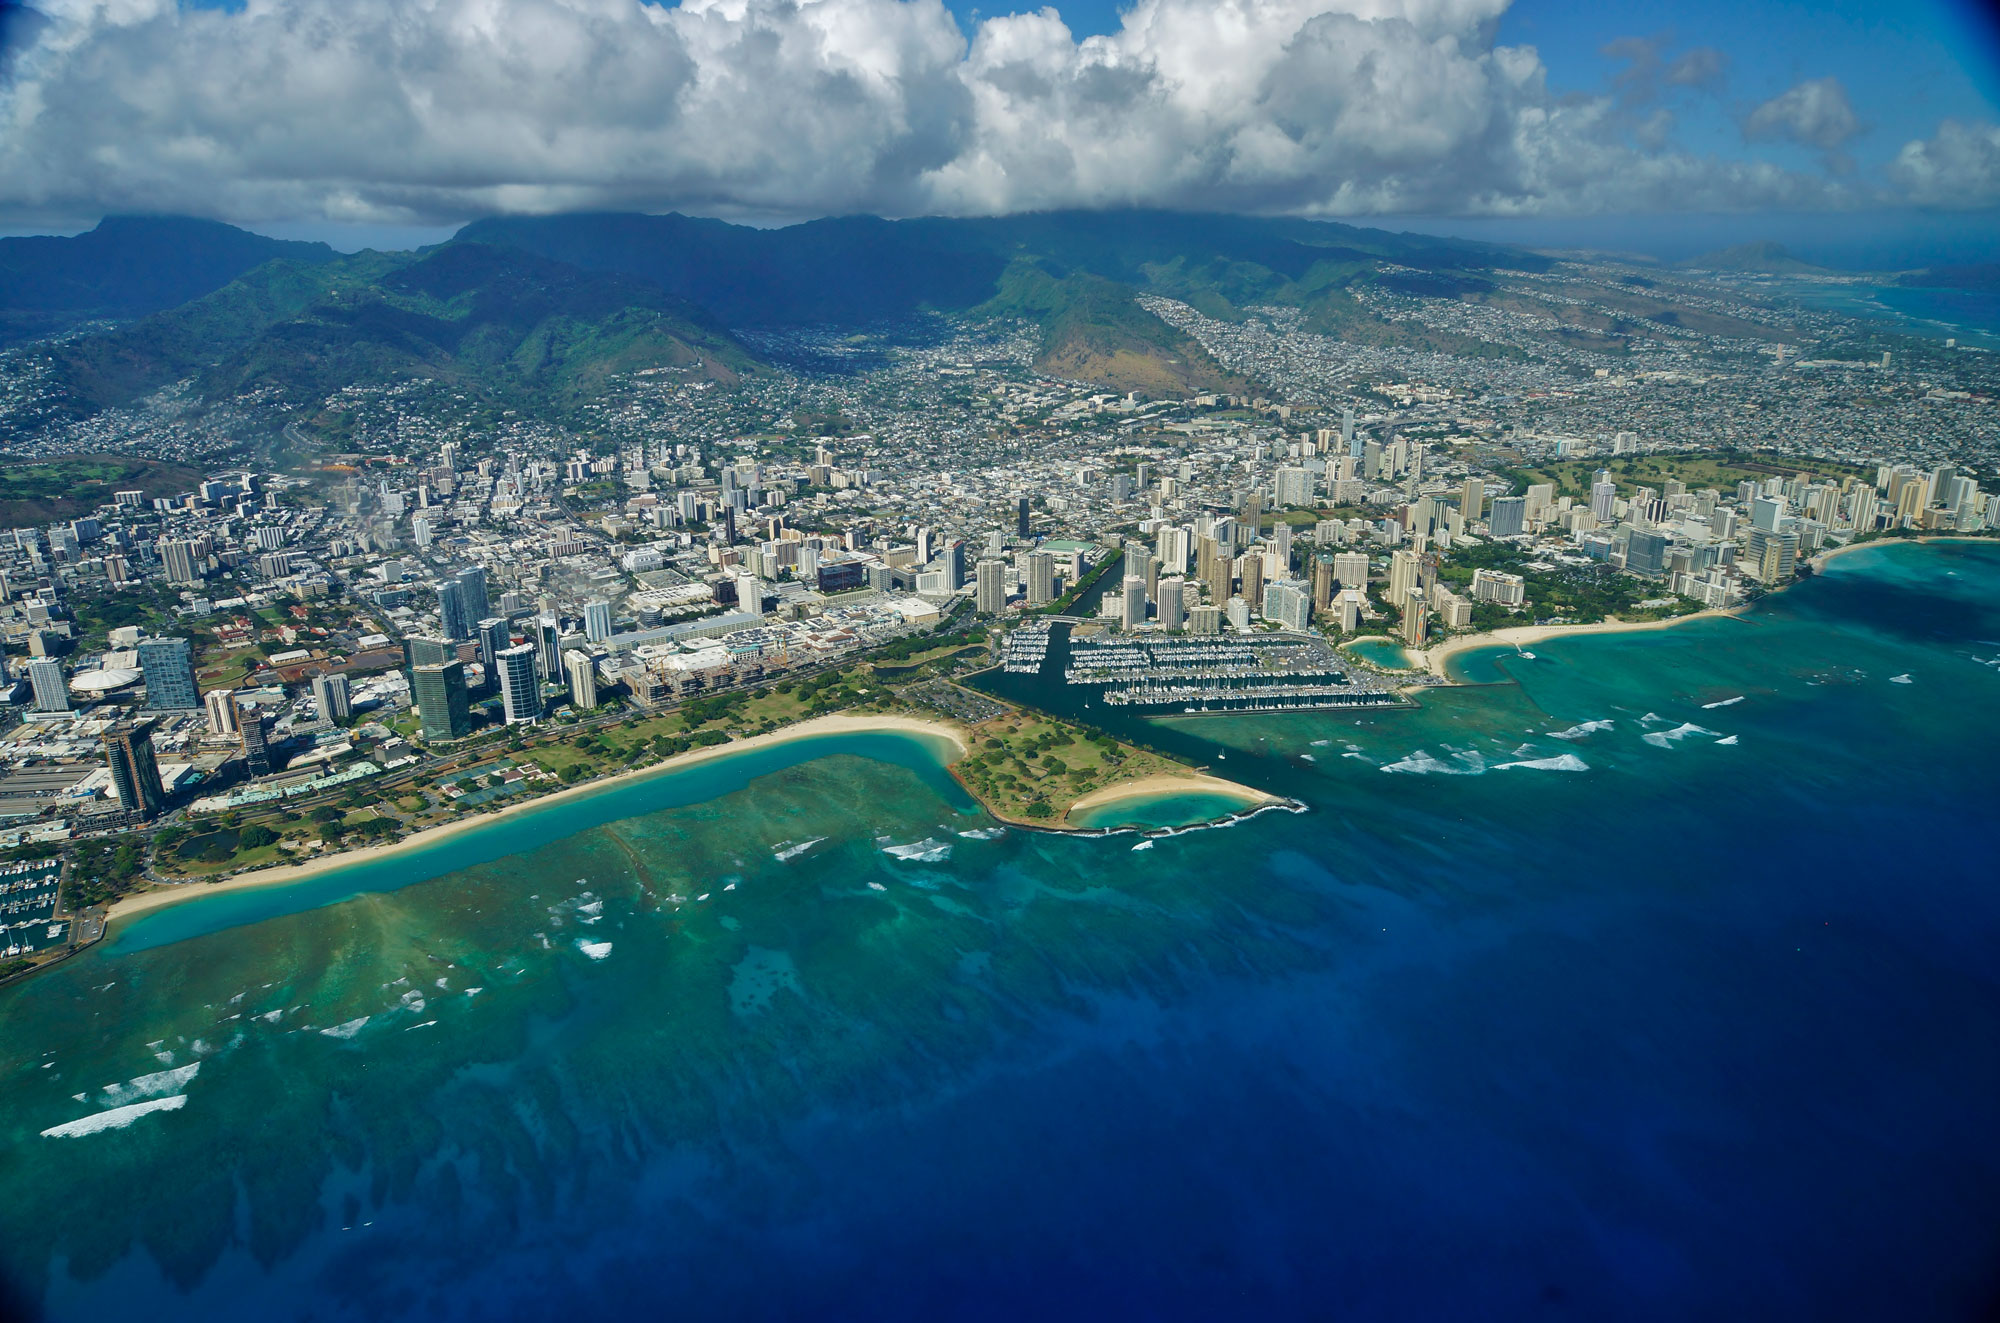 Aerial photograph of Waikiki, O'ahu, and nearby reefs. The photo shows building of a city, including many high-rises, next to the seashore. The coastline is fringed by a sandy beach. Wide coral reefs can be seen in the water just off the coast. They look like greenish and brownish patches in the water.